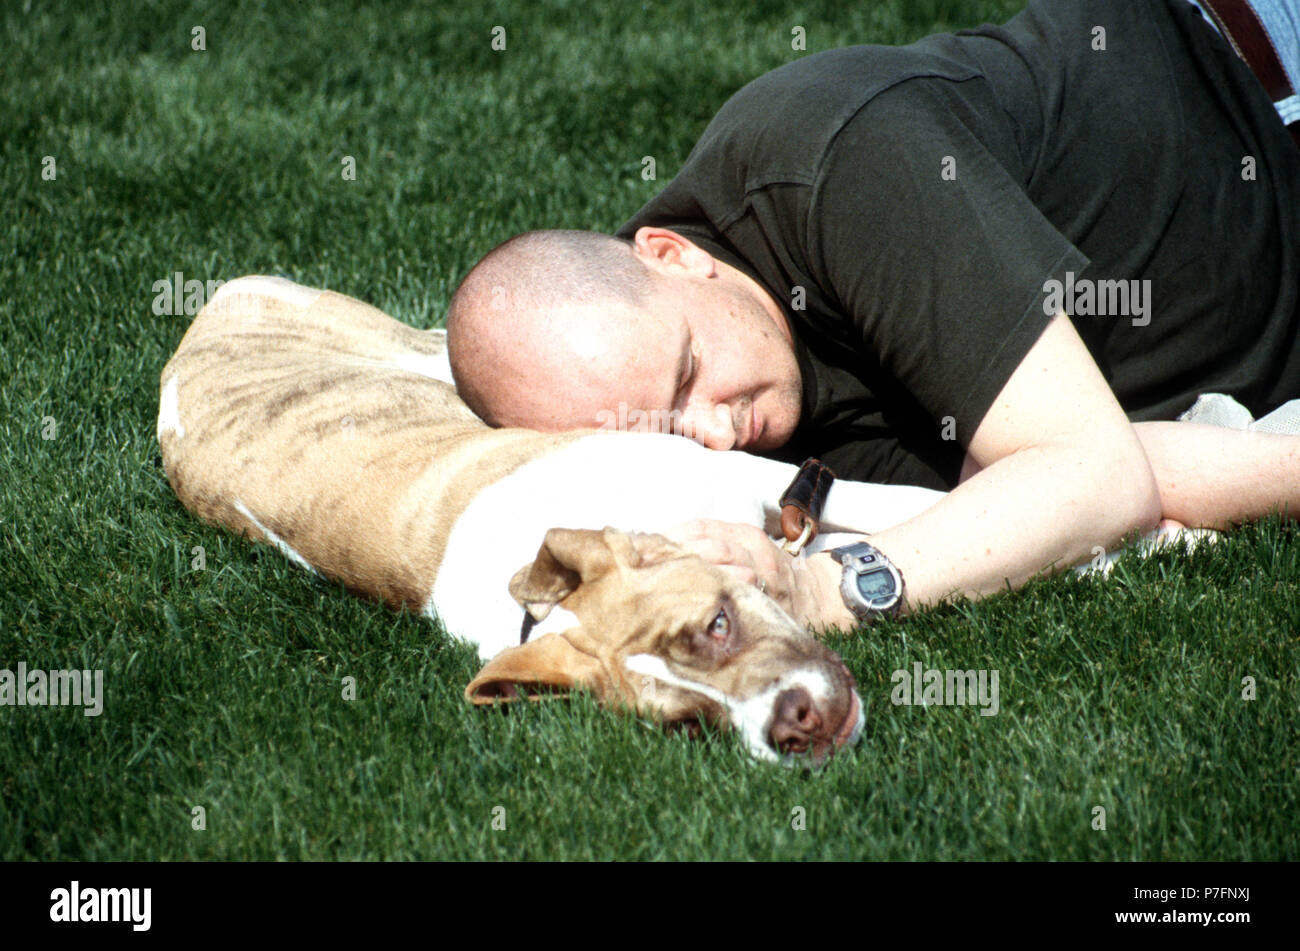 Man sleeps with dog as pillow, Berlin, Germany Stock Photo